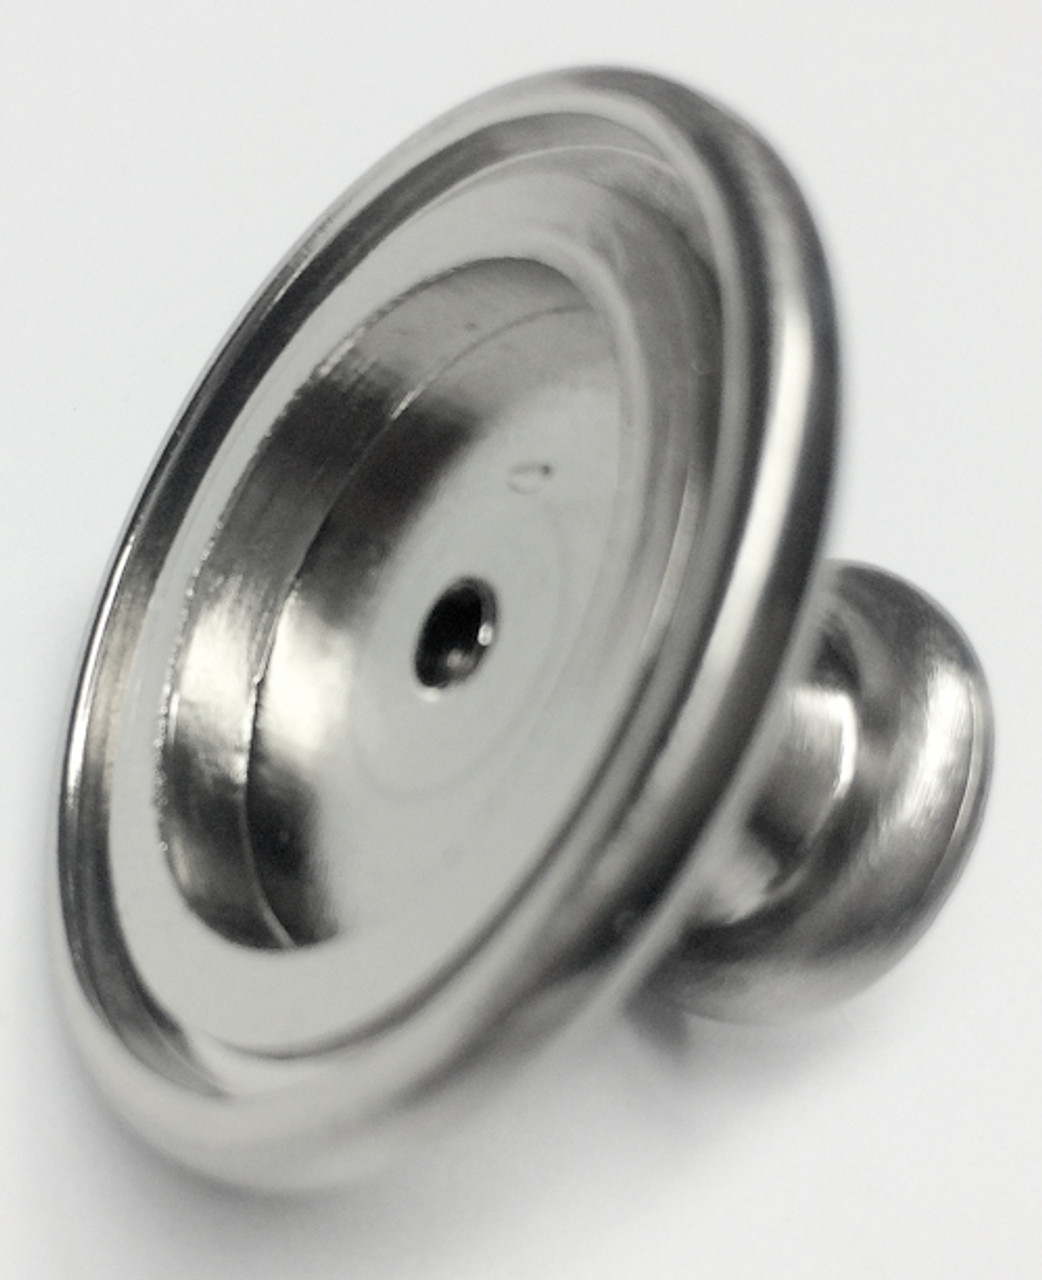 Brushed Nickel Knob Base for 30mm Insert DL-P3219-BASE-BN - D. Lawless ...